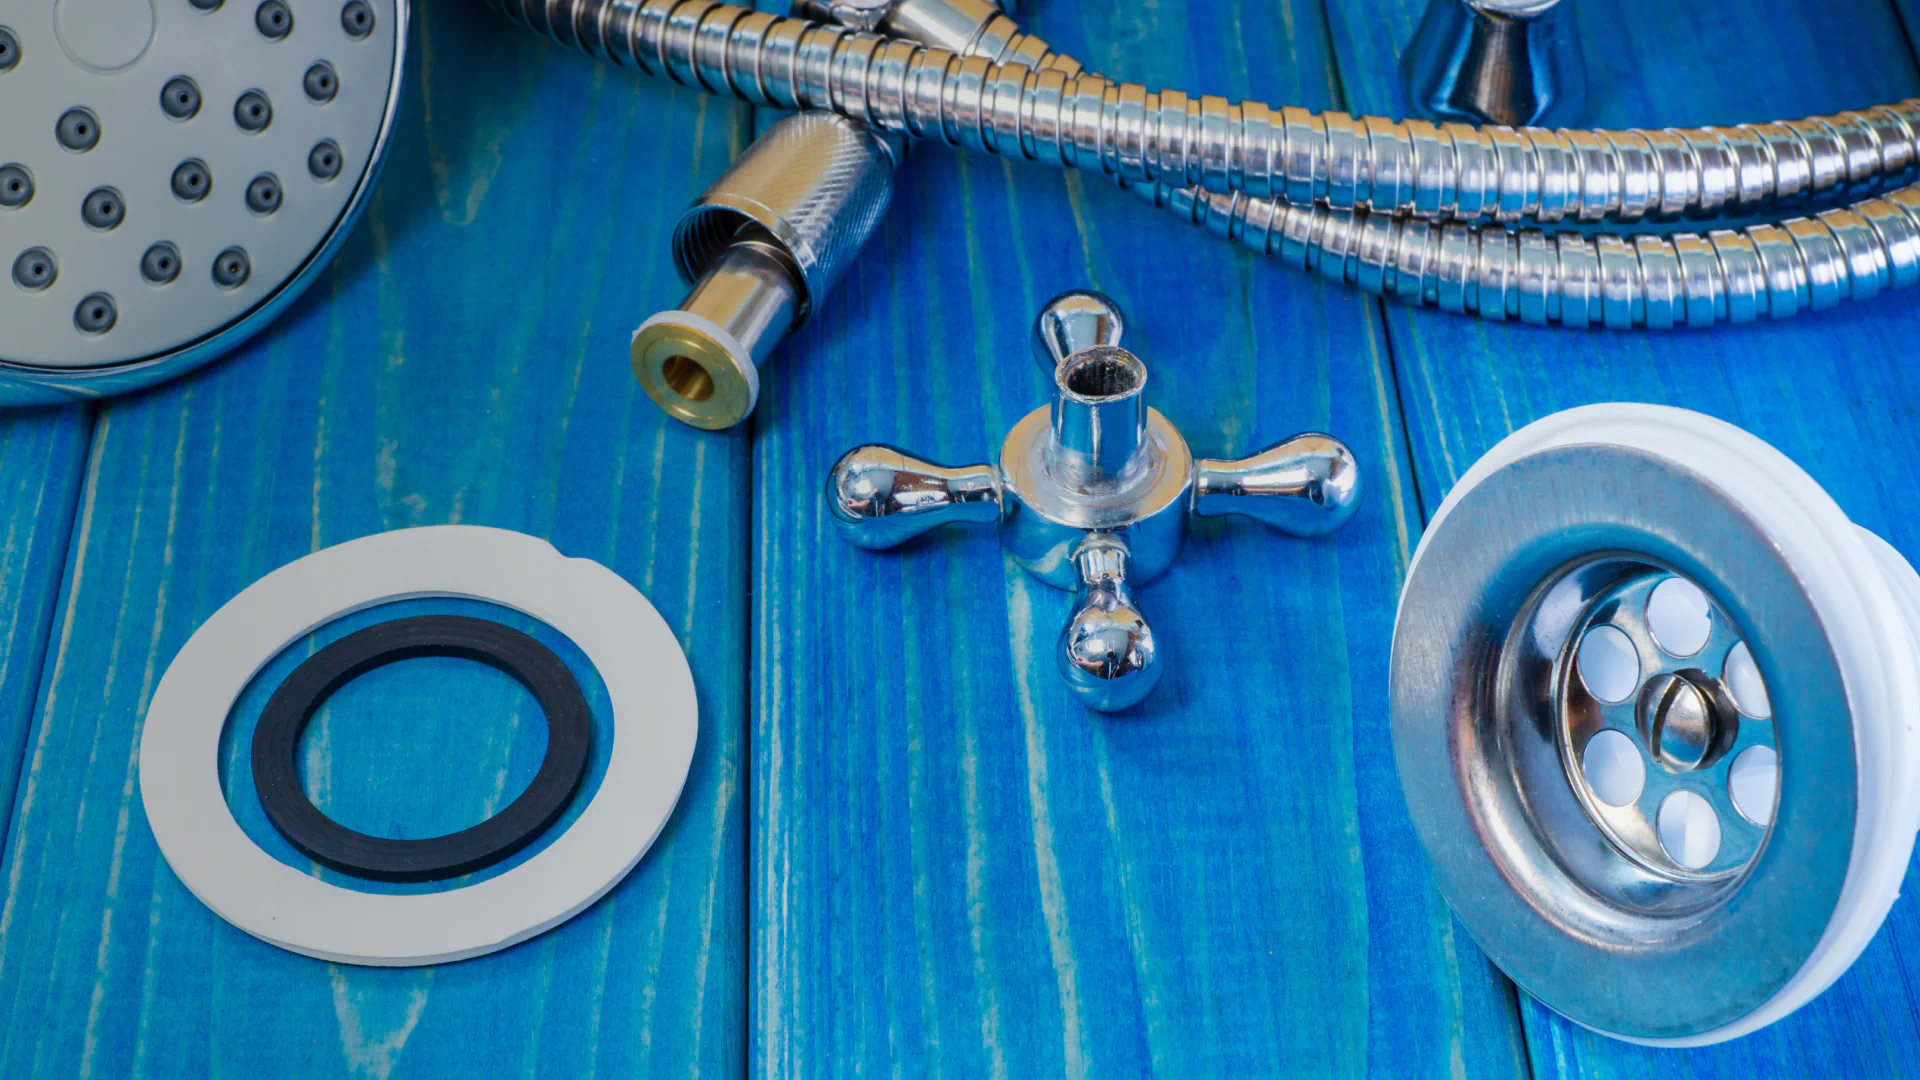 accessories and tools for plumbing repair service